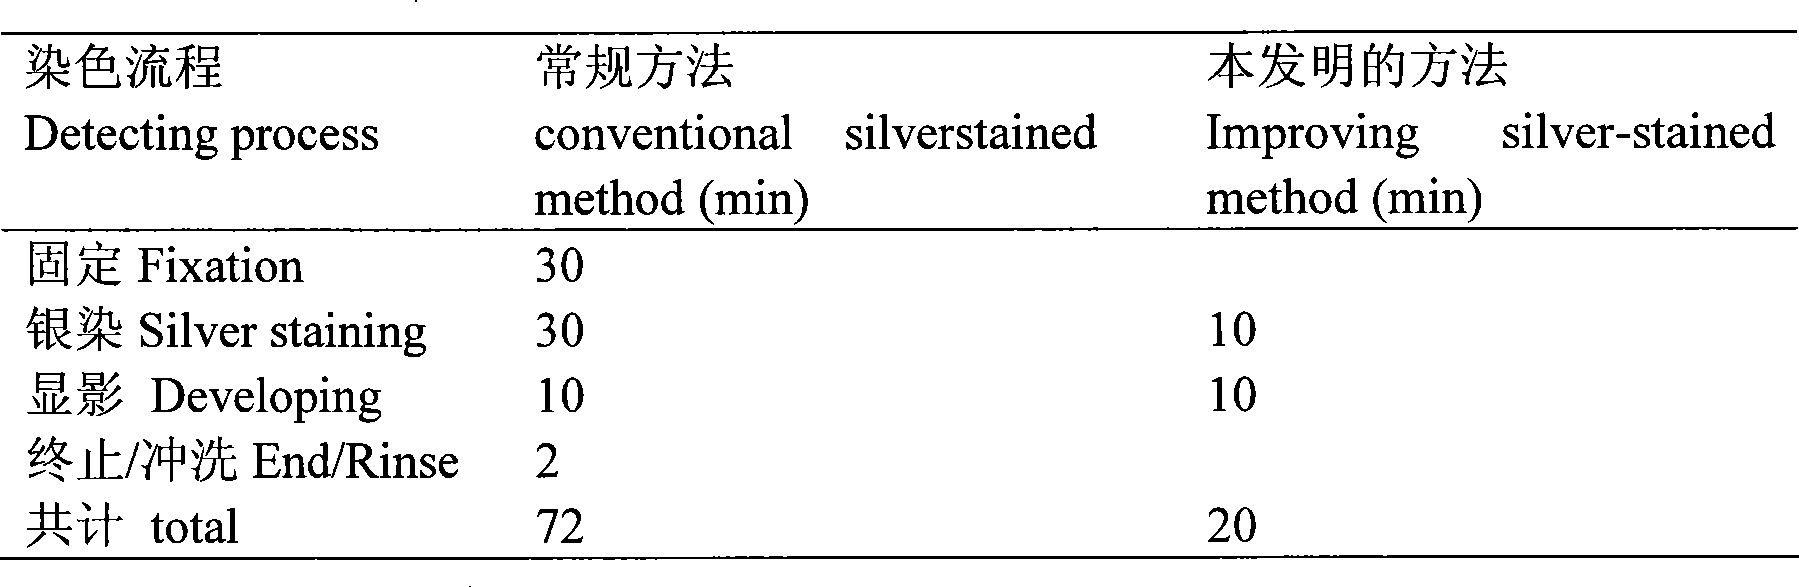 DNA silver staining method